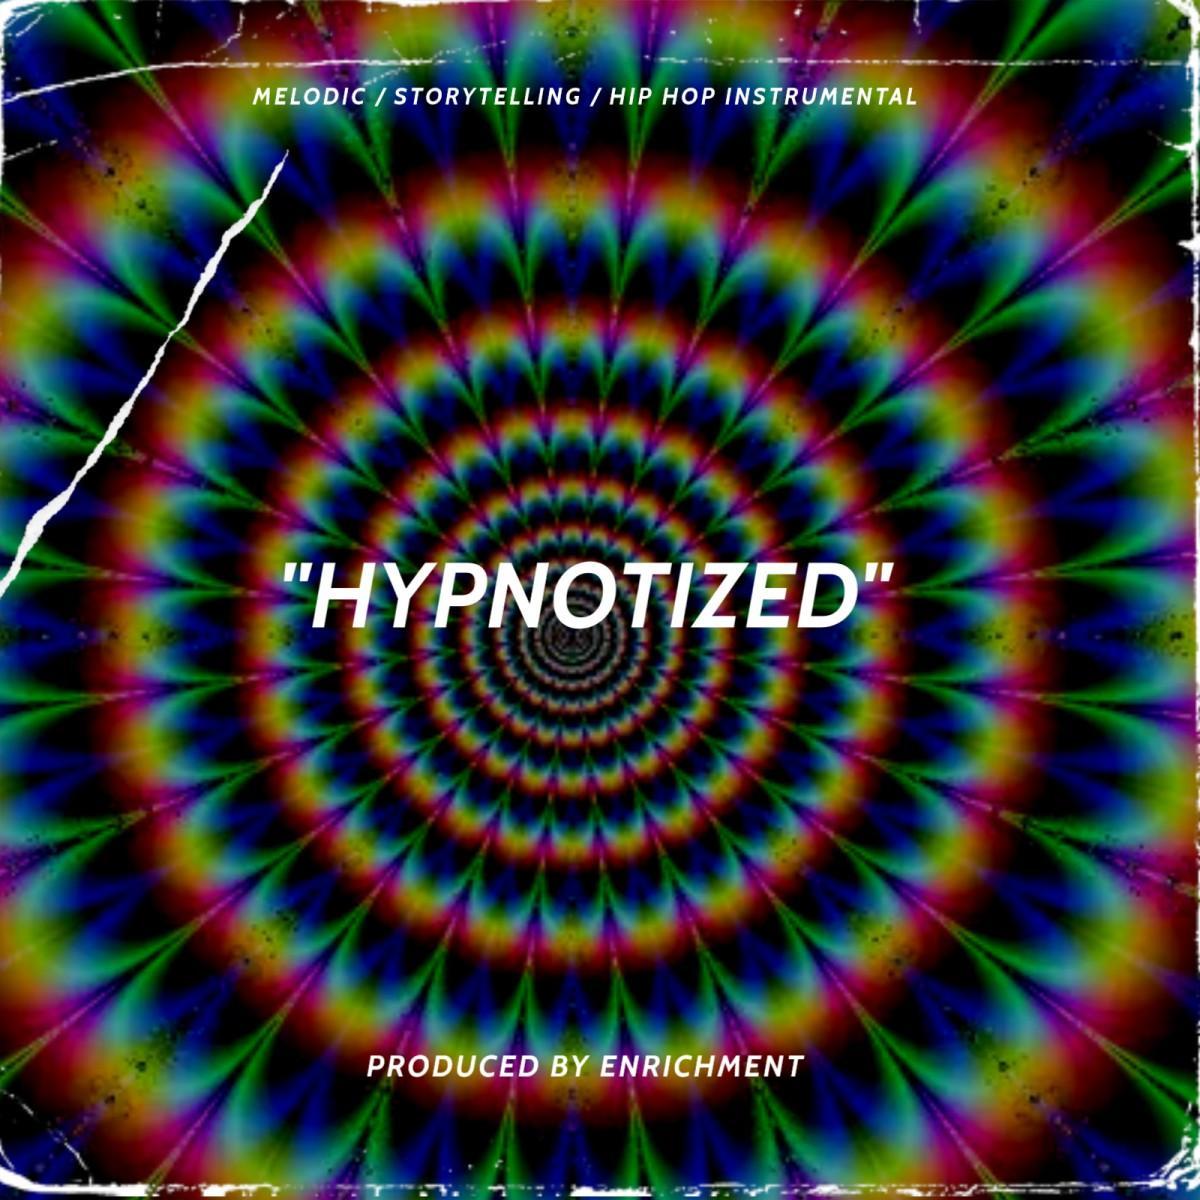 Cover of Hypnotized